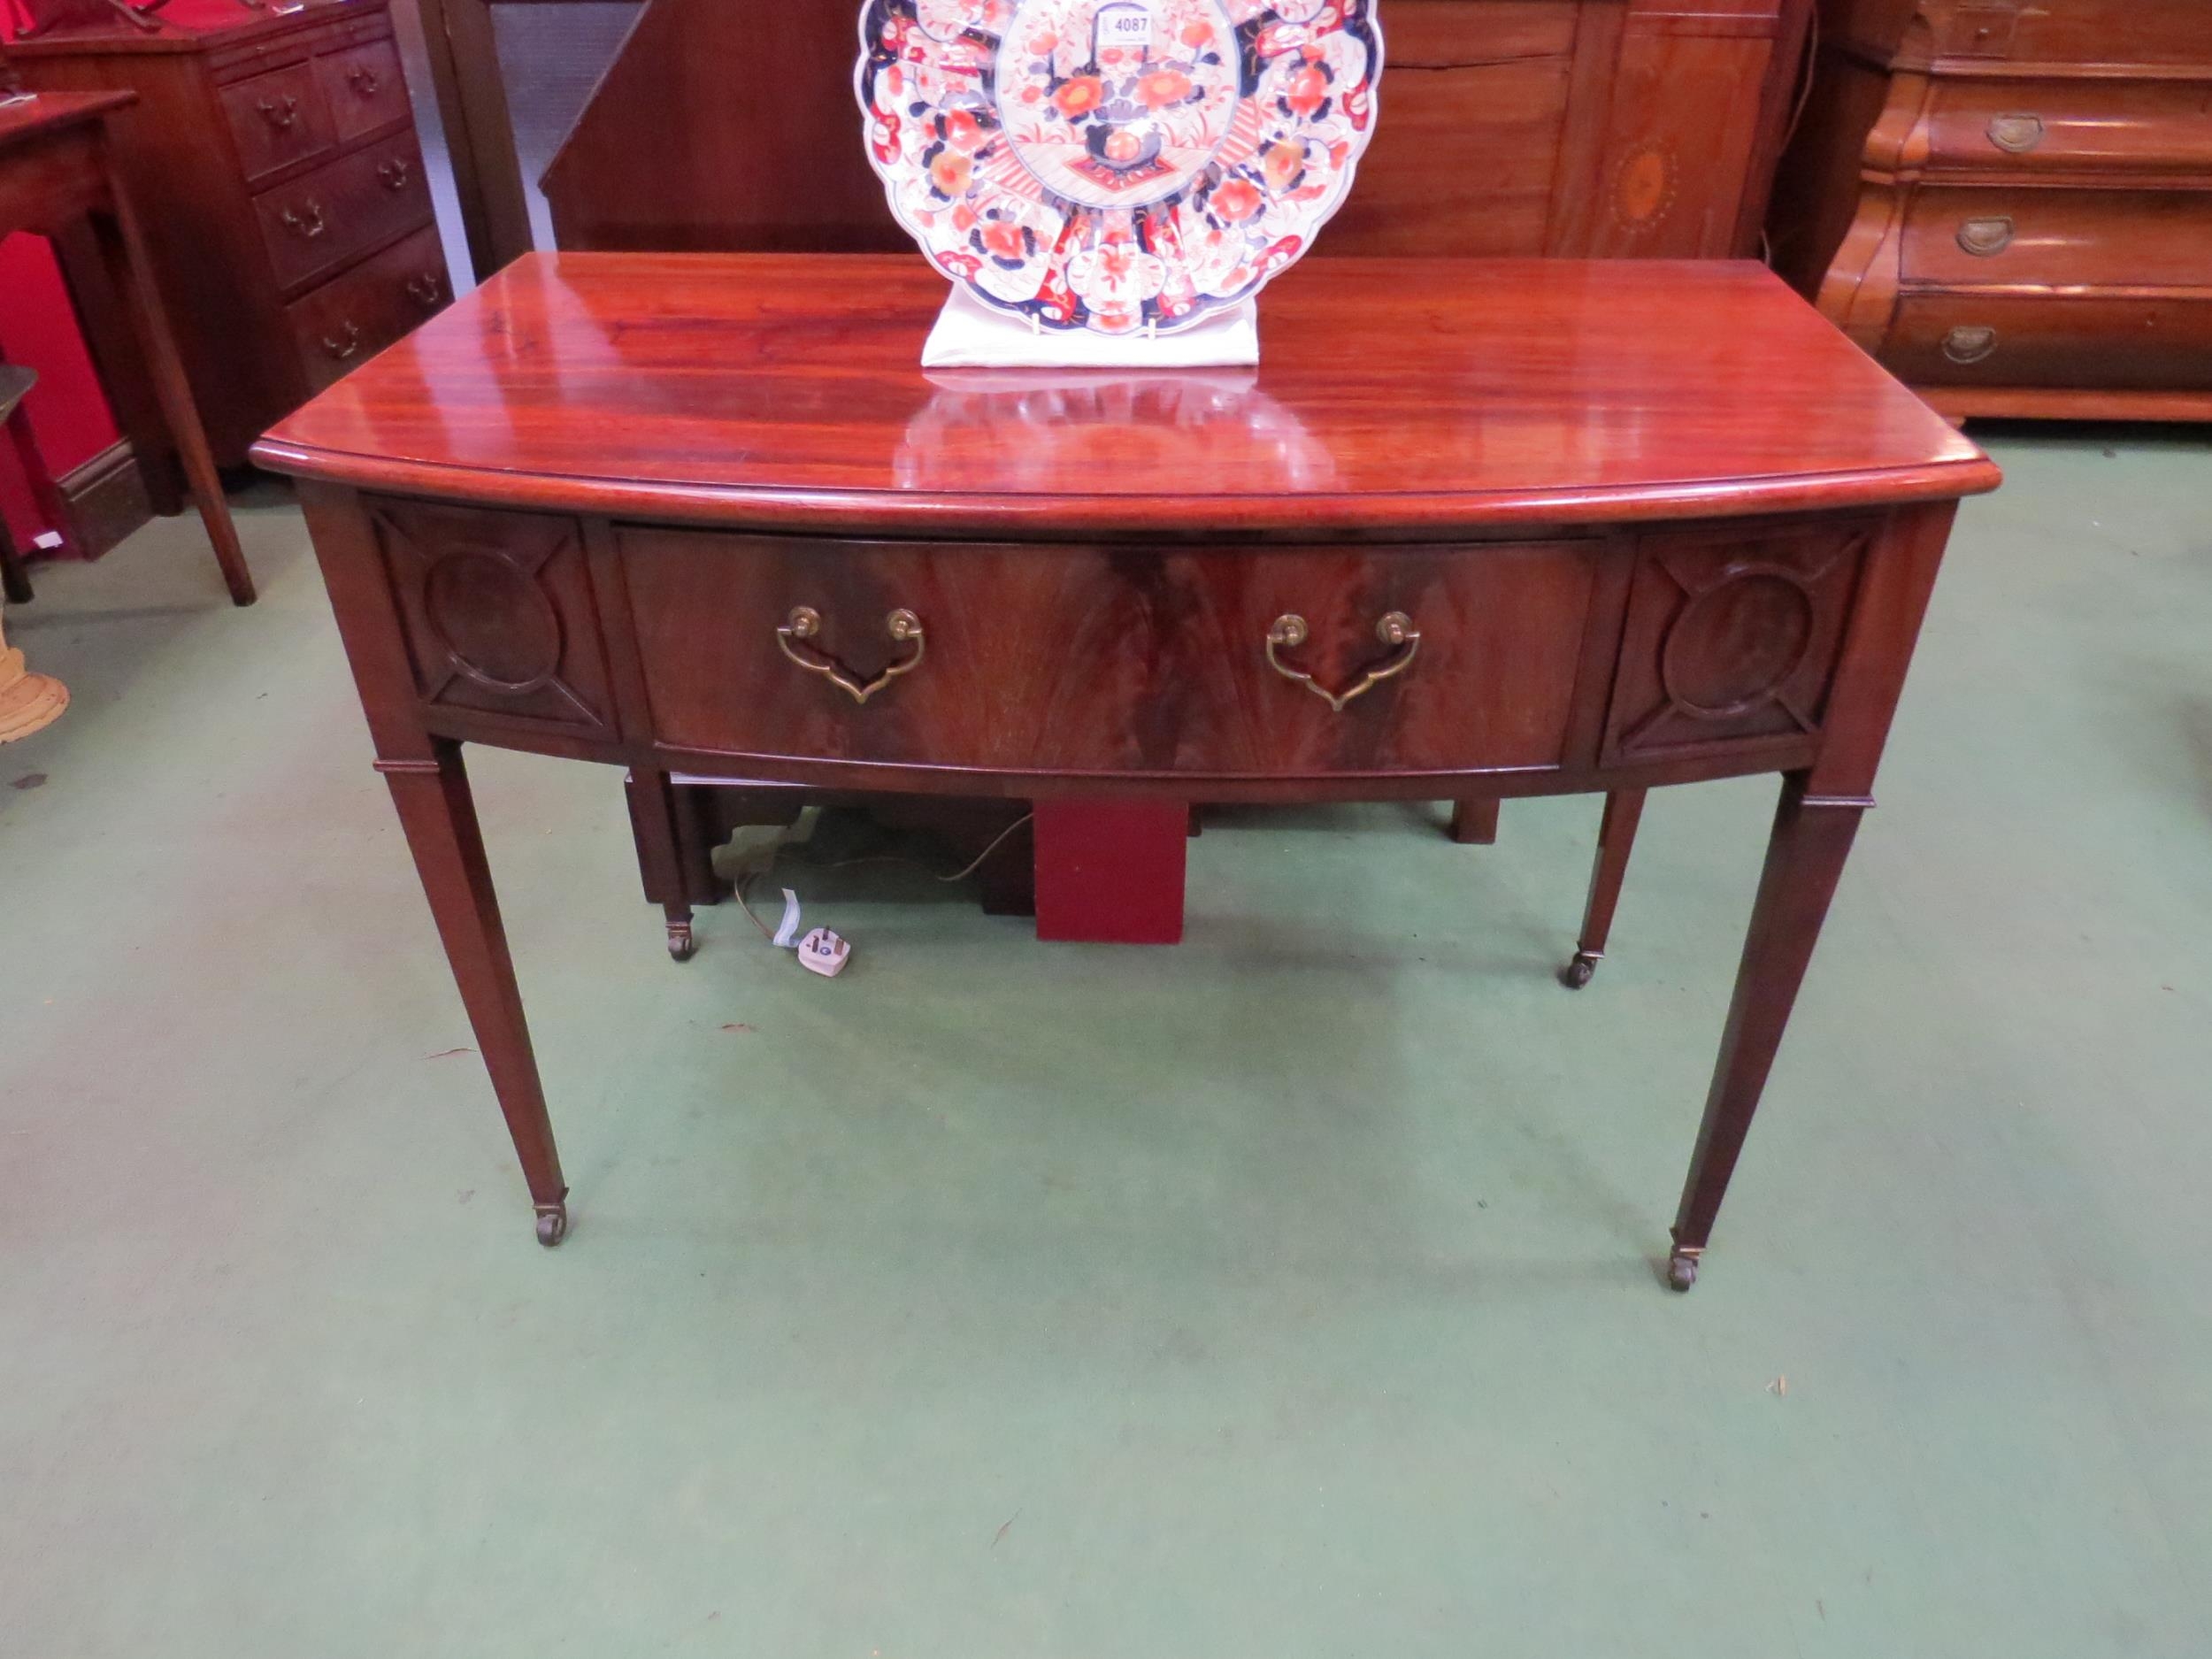 Circa 1860 a flame mahogany bow front side table, the single frieze drawer flanked by moulded panels